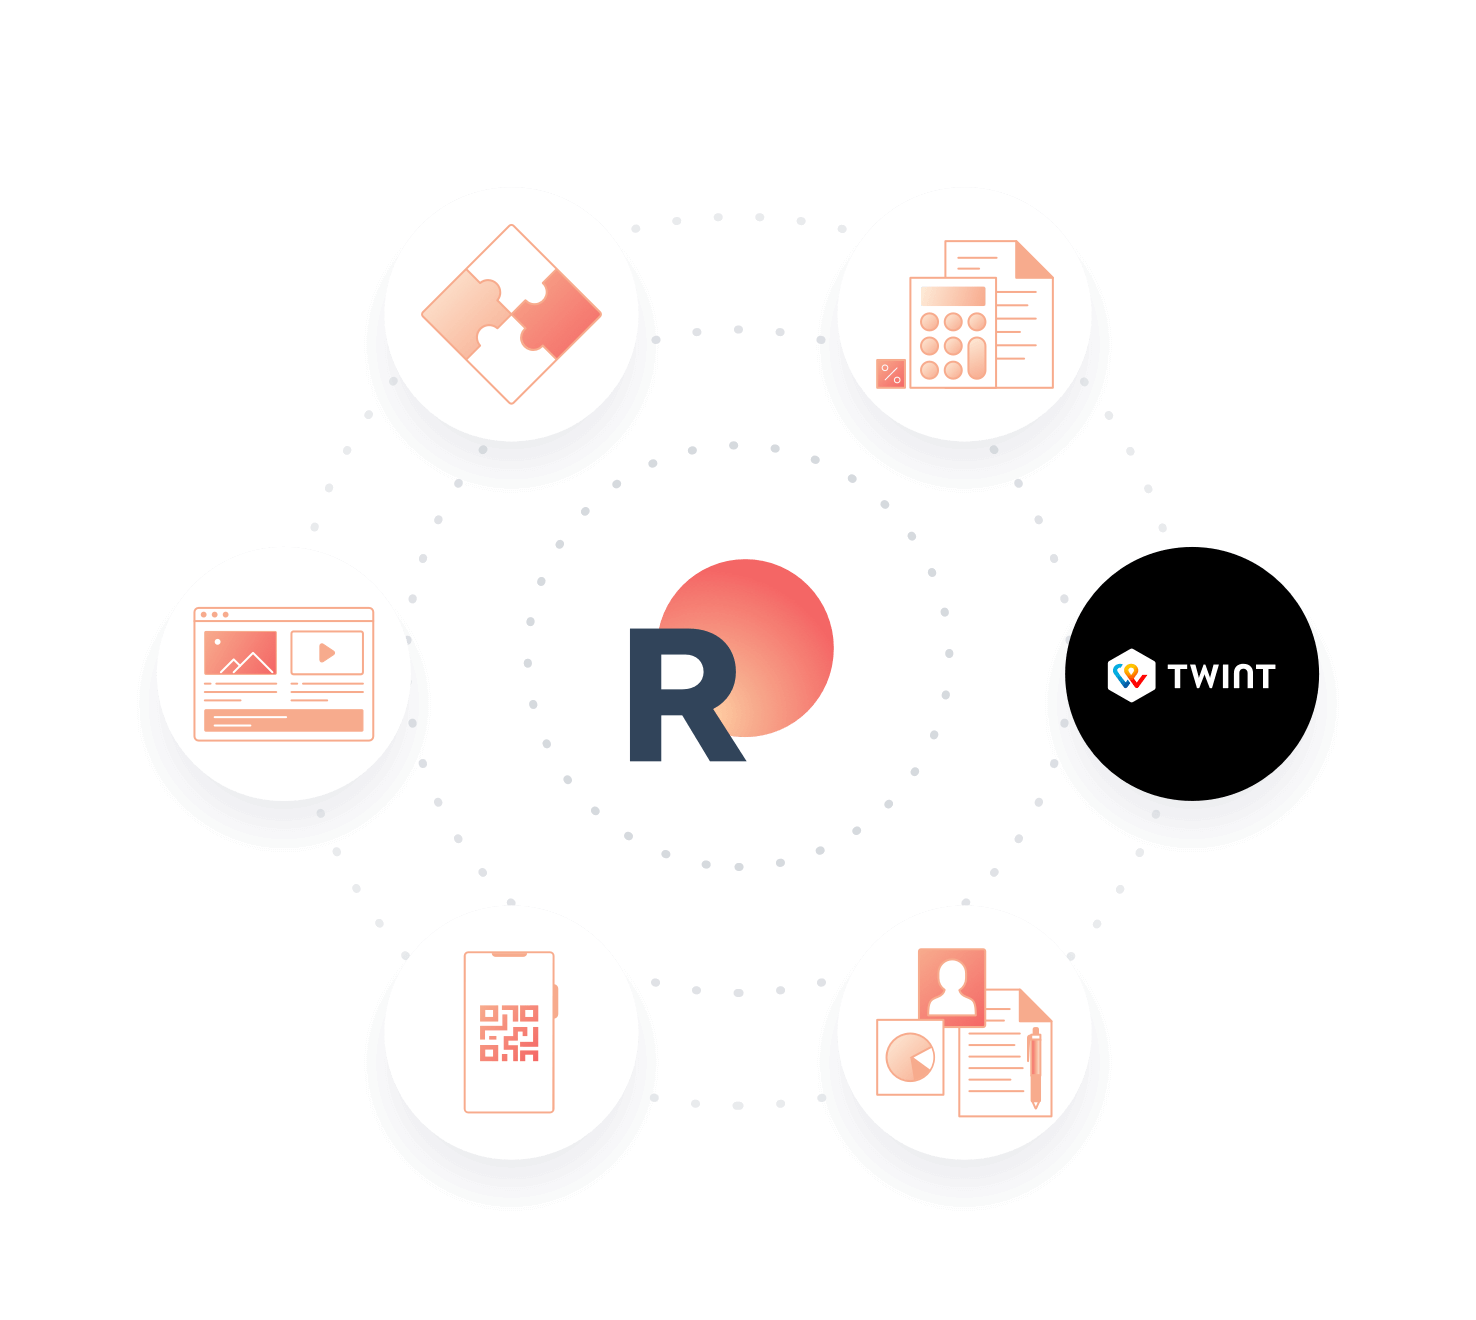 Our all-in-one platform with TWINT